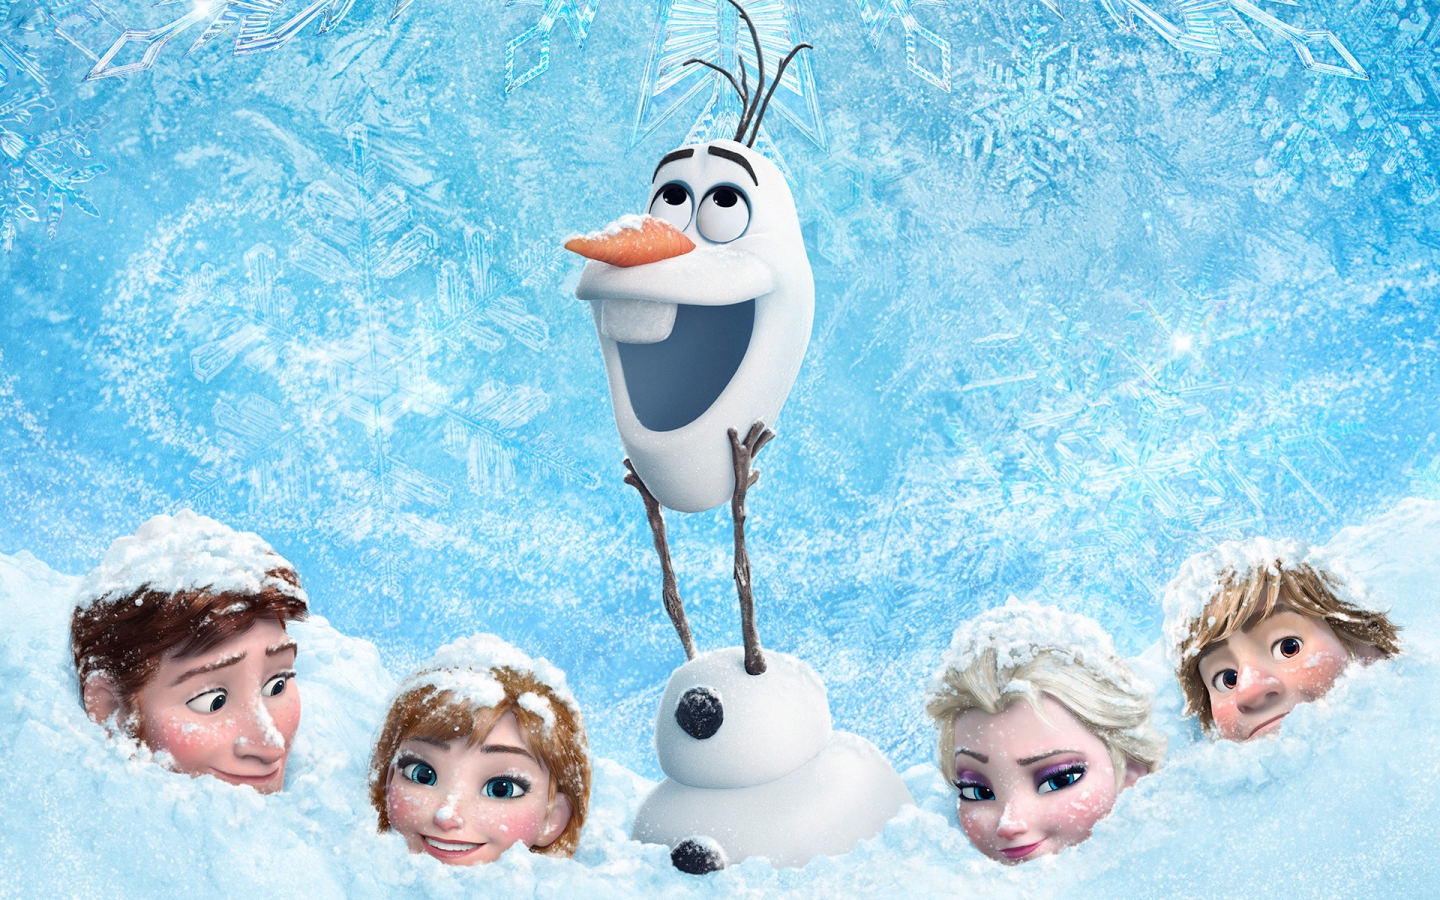 Frozen Animation for 1440 x 900 widescreen resolution